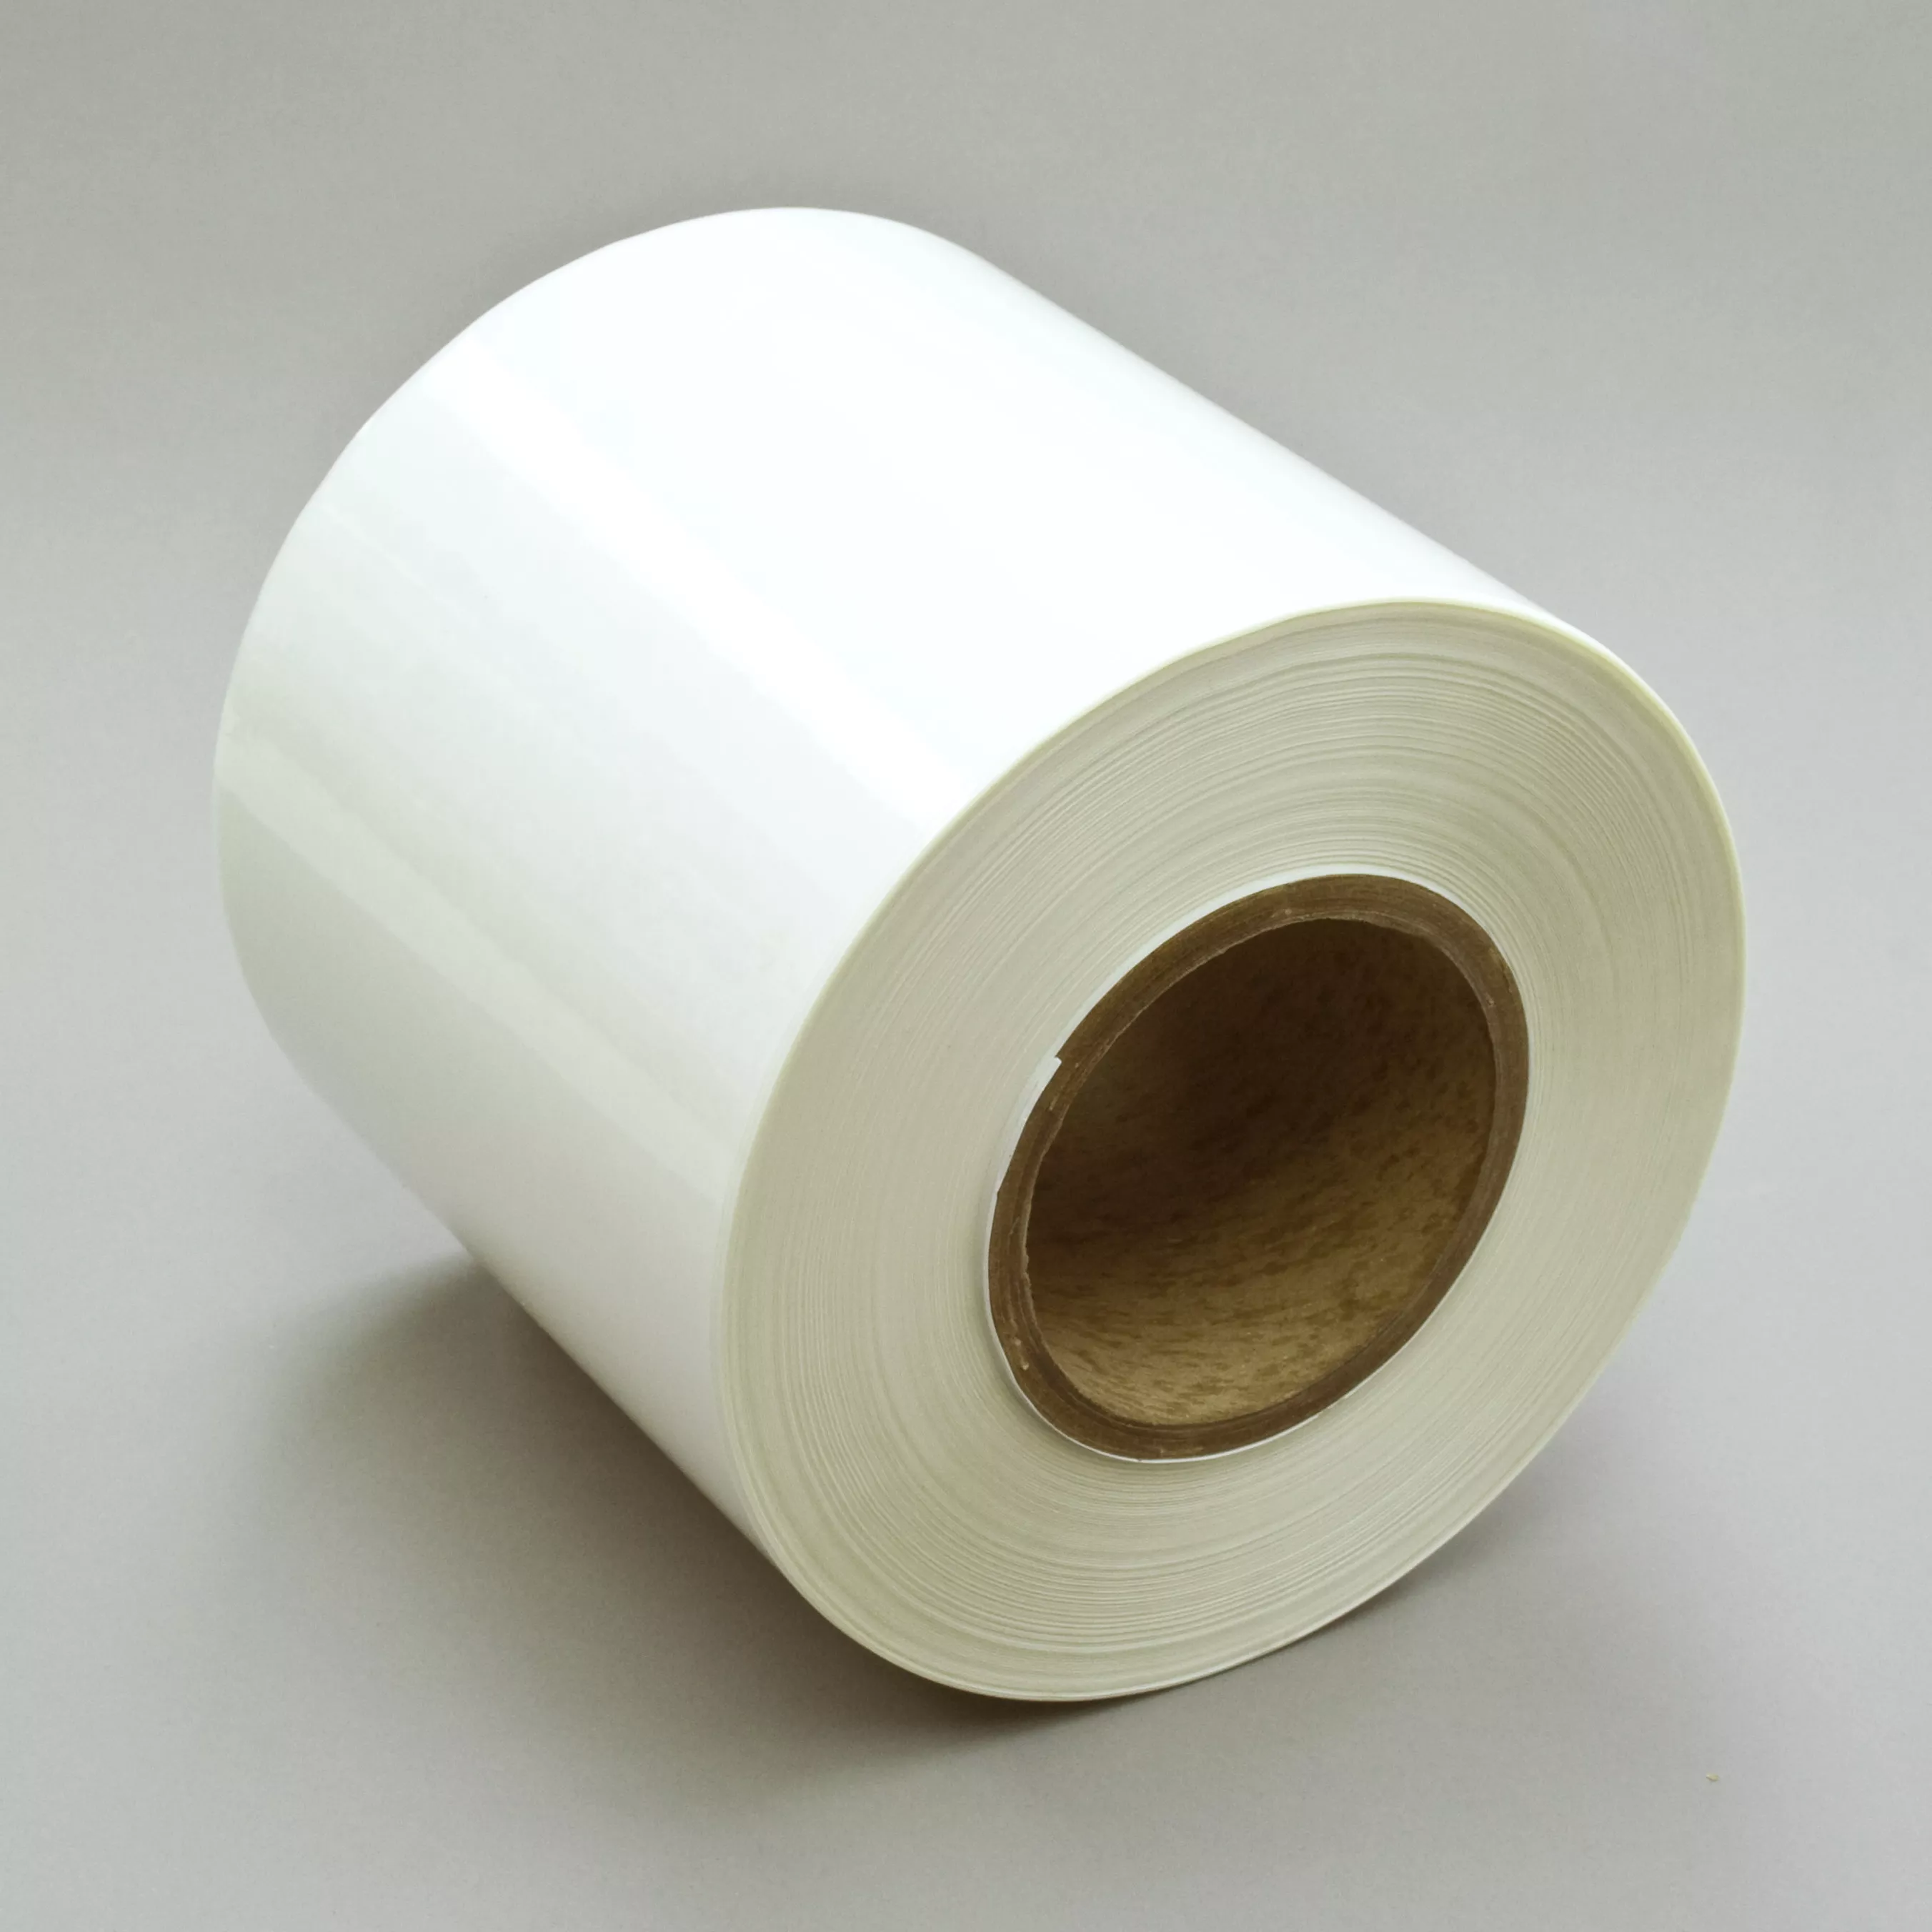 3M™ Dot Matrix Label Material 7881, Clear Polyester Matte, 6 in x 1668
ft, 1 Roll/Case